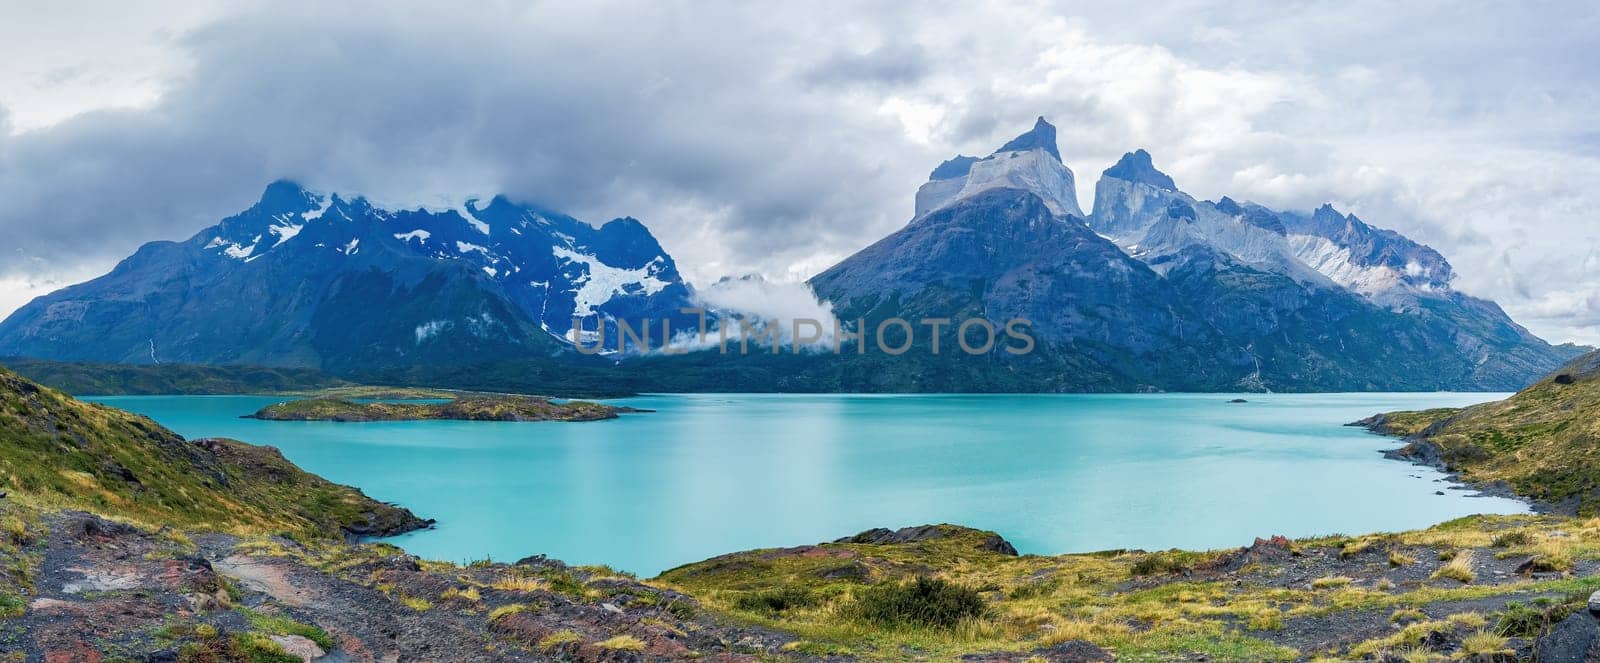 Majestic Mountain Peaks and Turquoise Lake Panoramic View by FerradalFCG